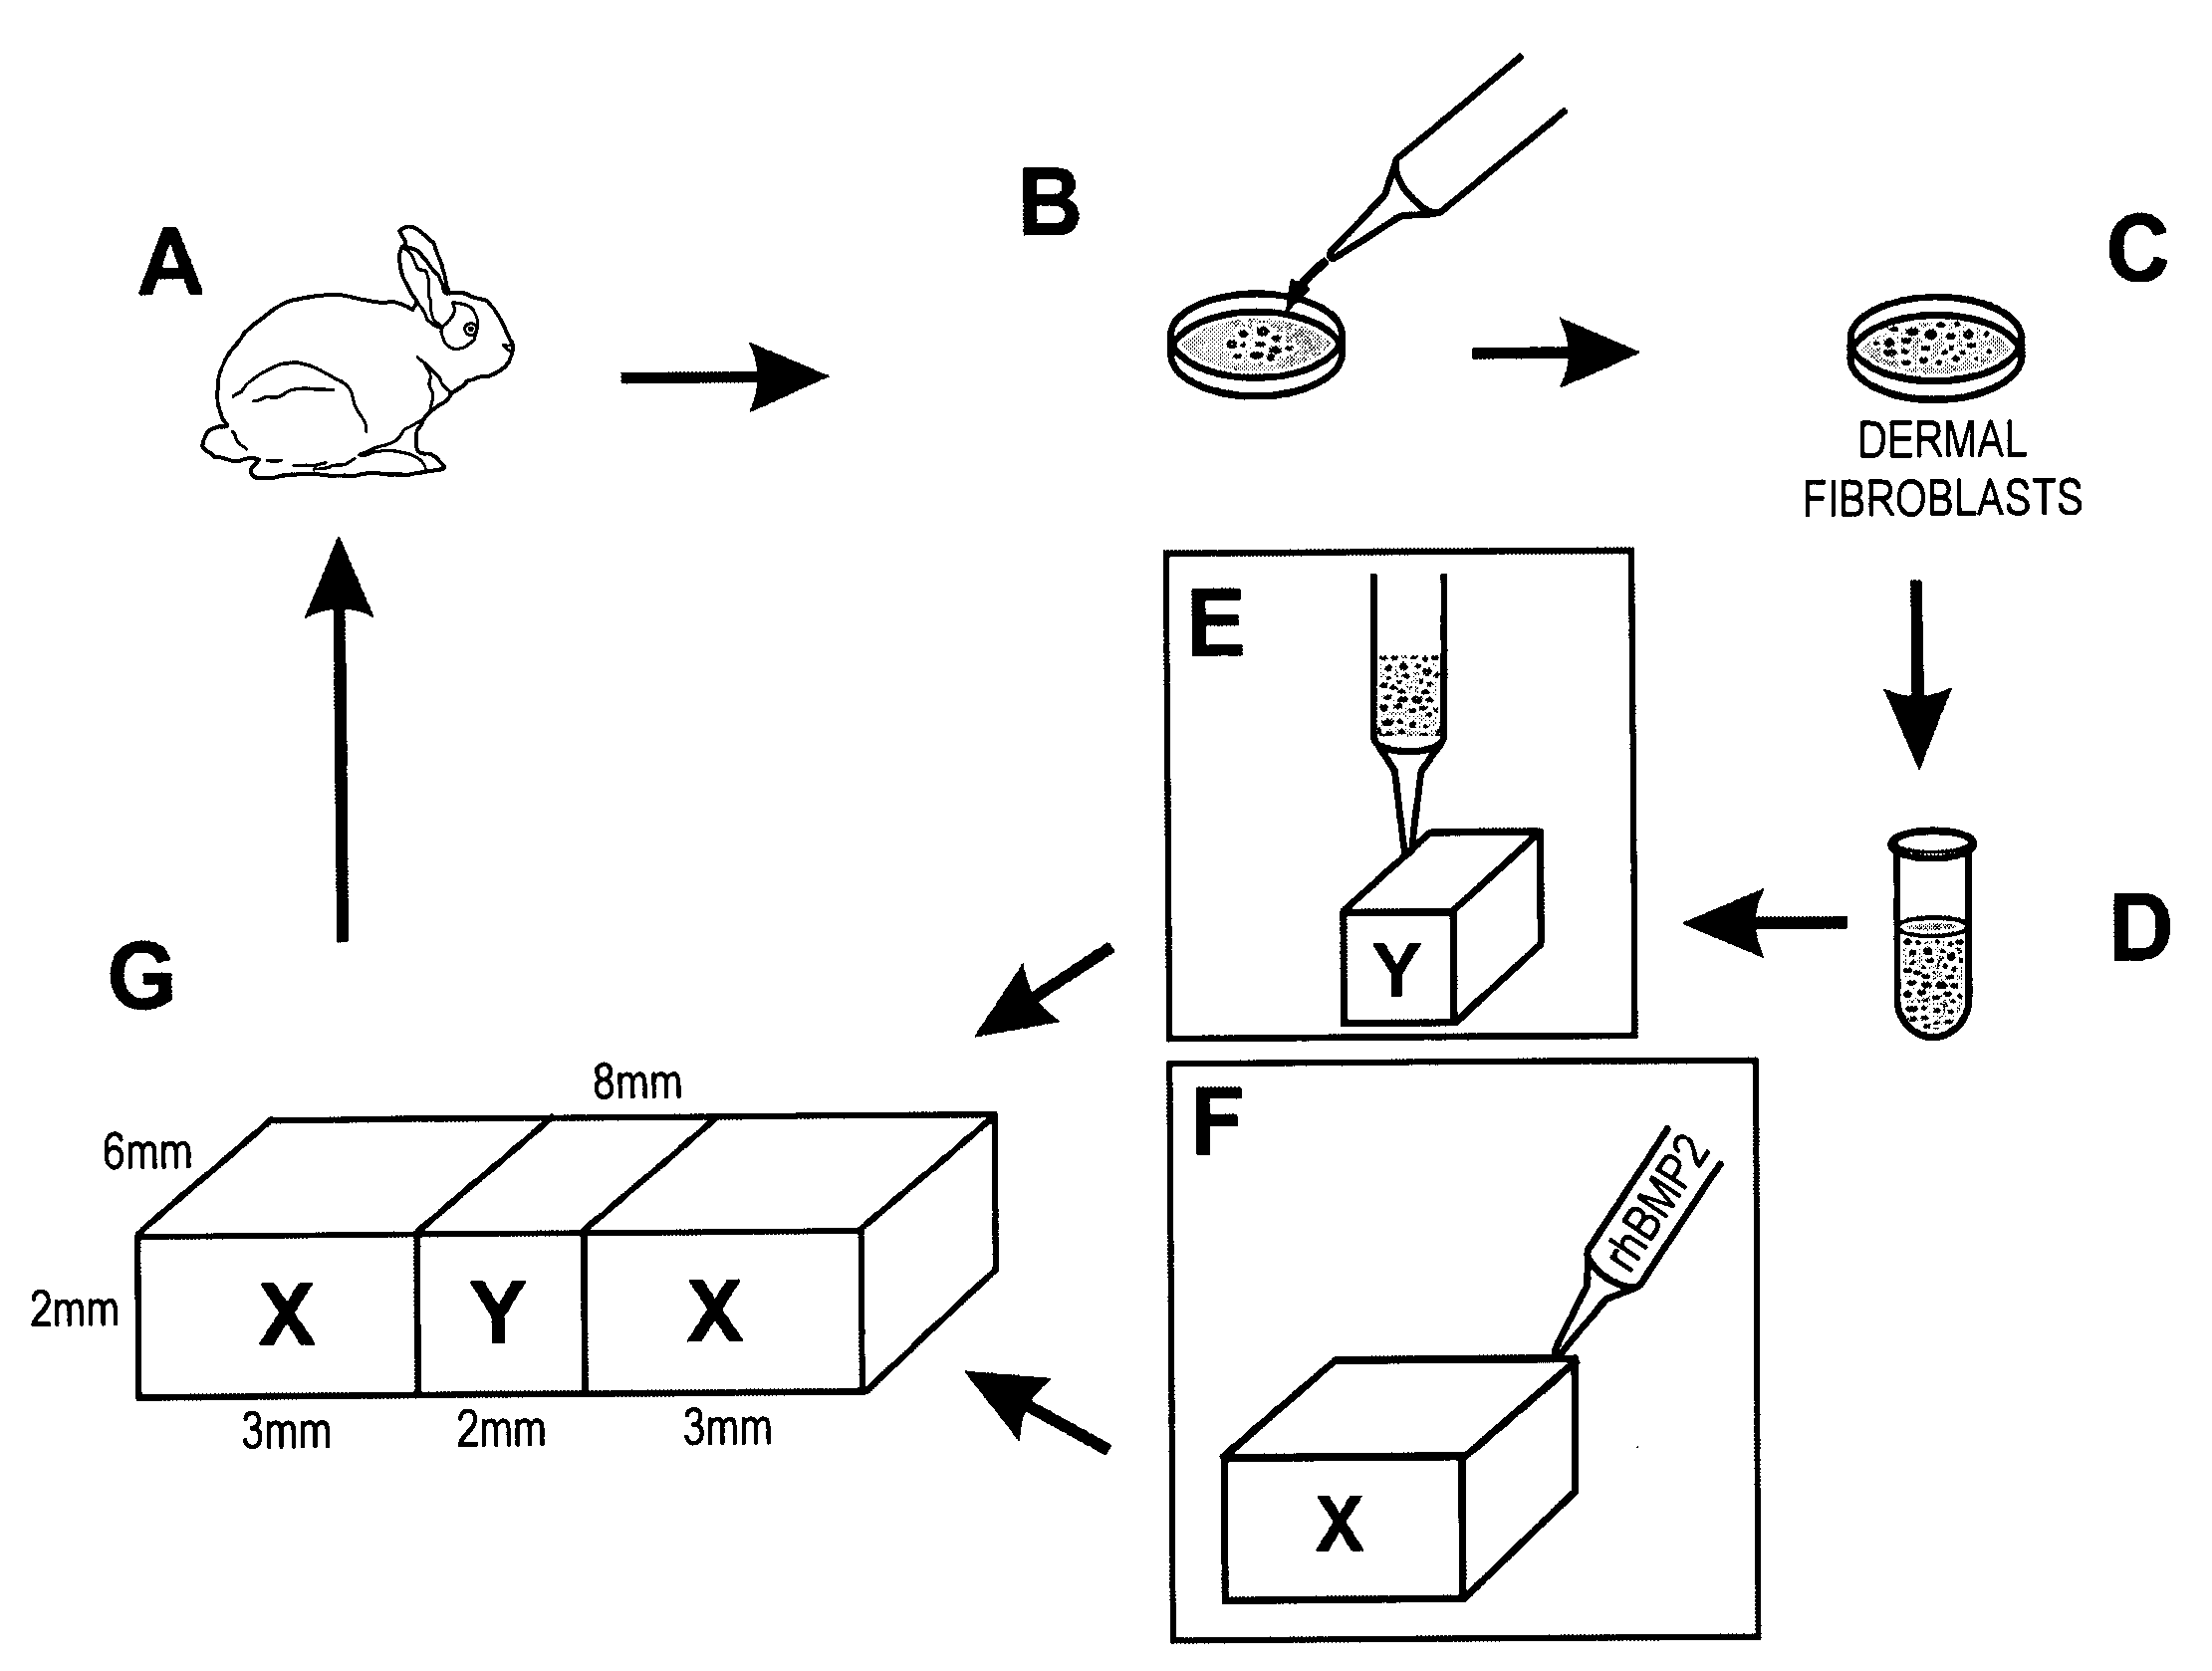 In vivo synthesis of connective tissues